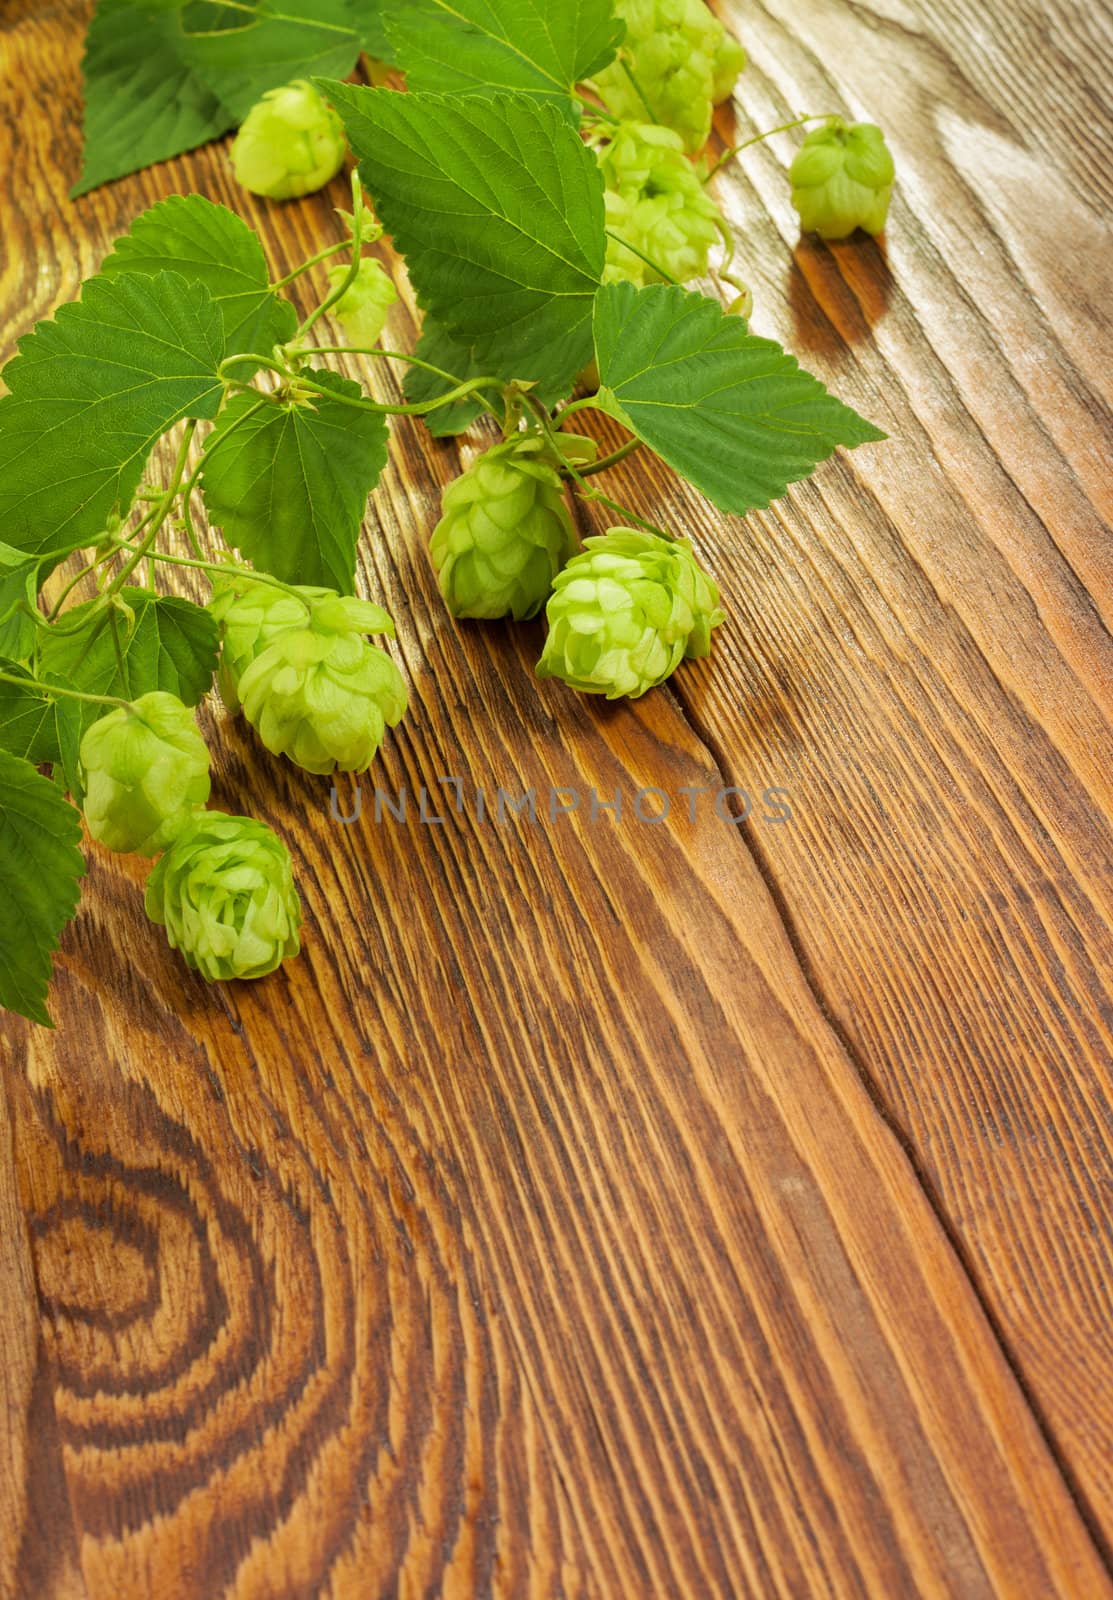 Hop plant on a wooden table by igor_stramyk